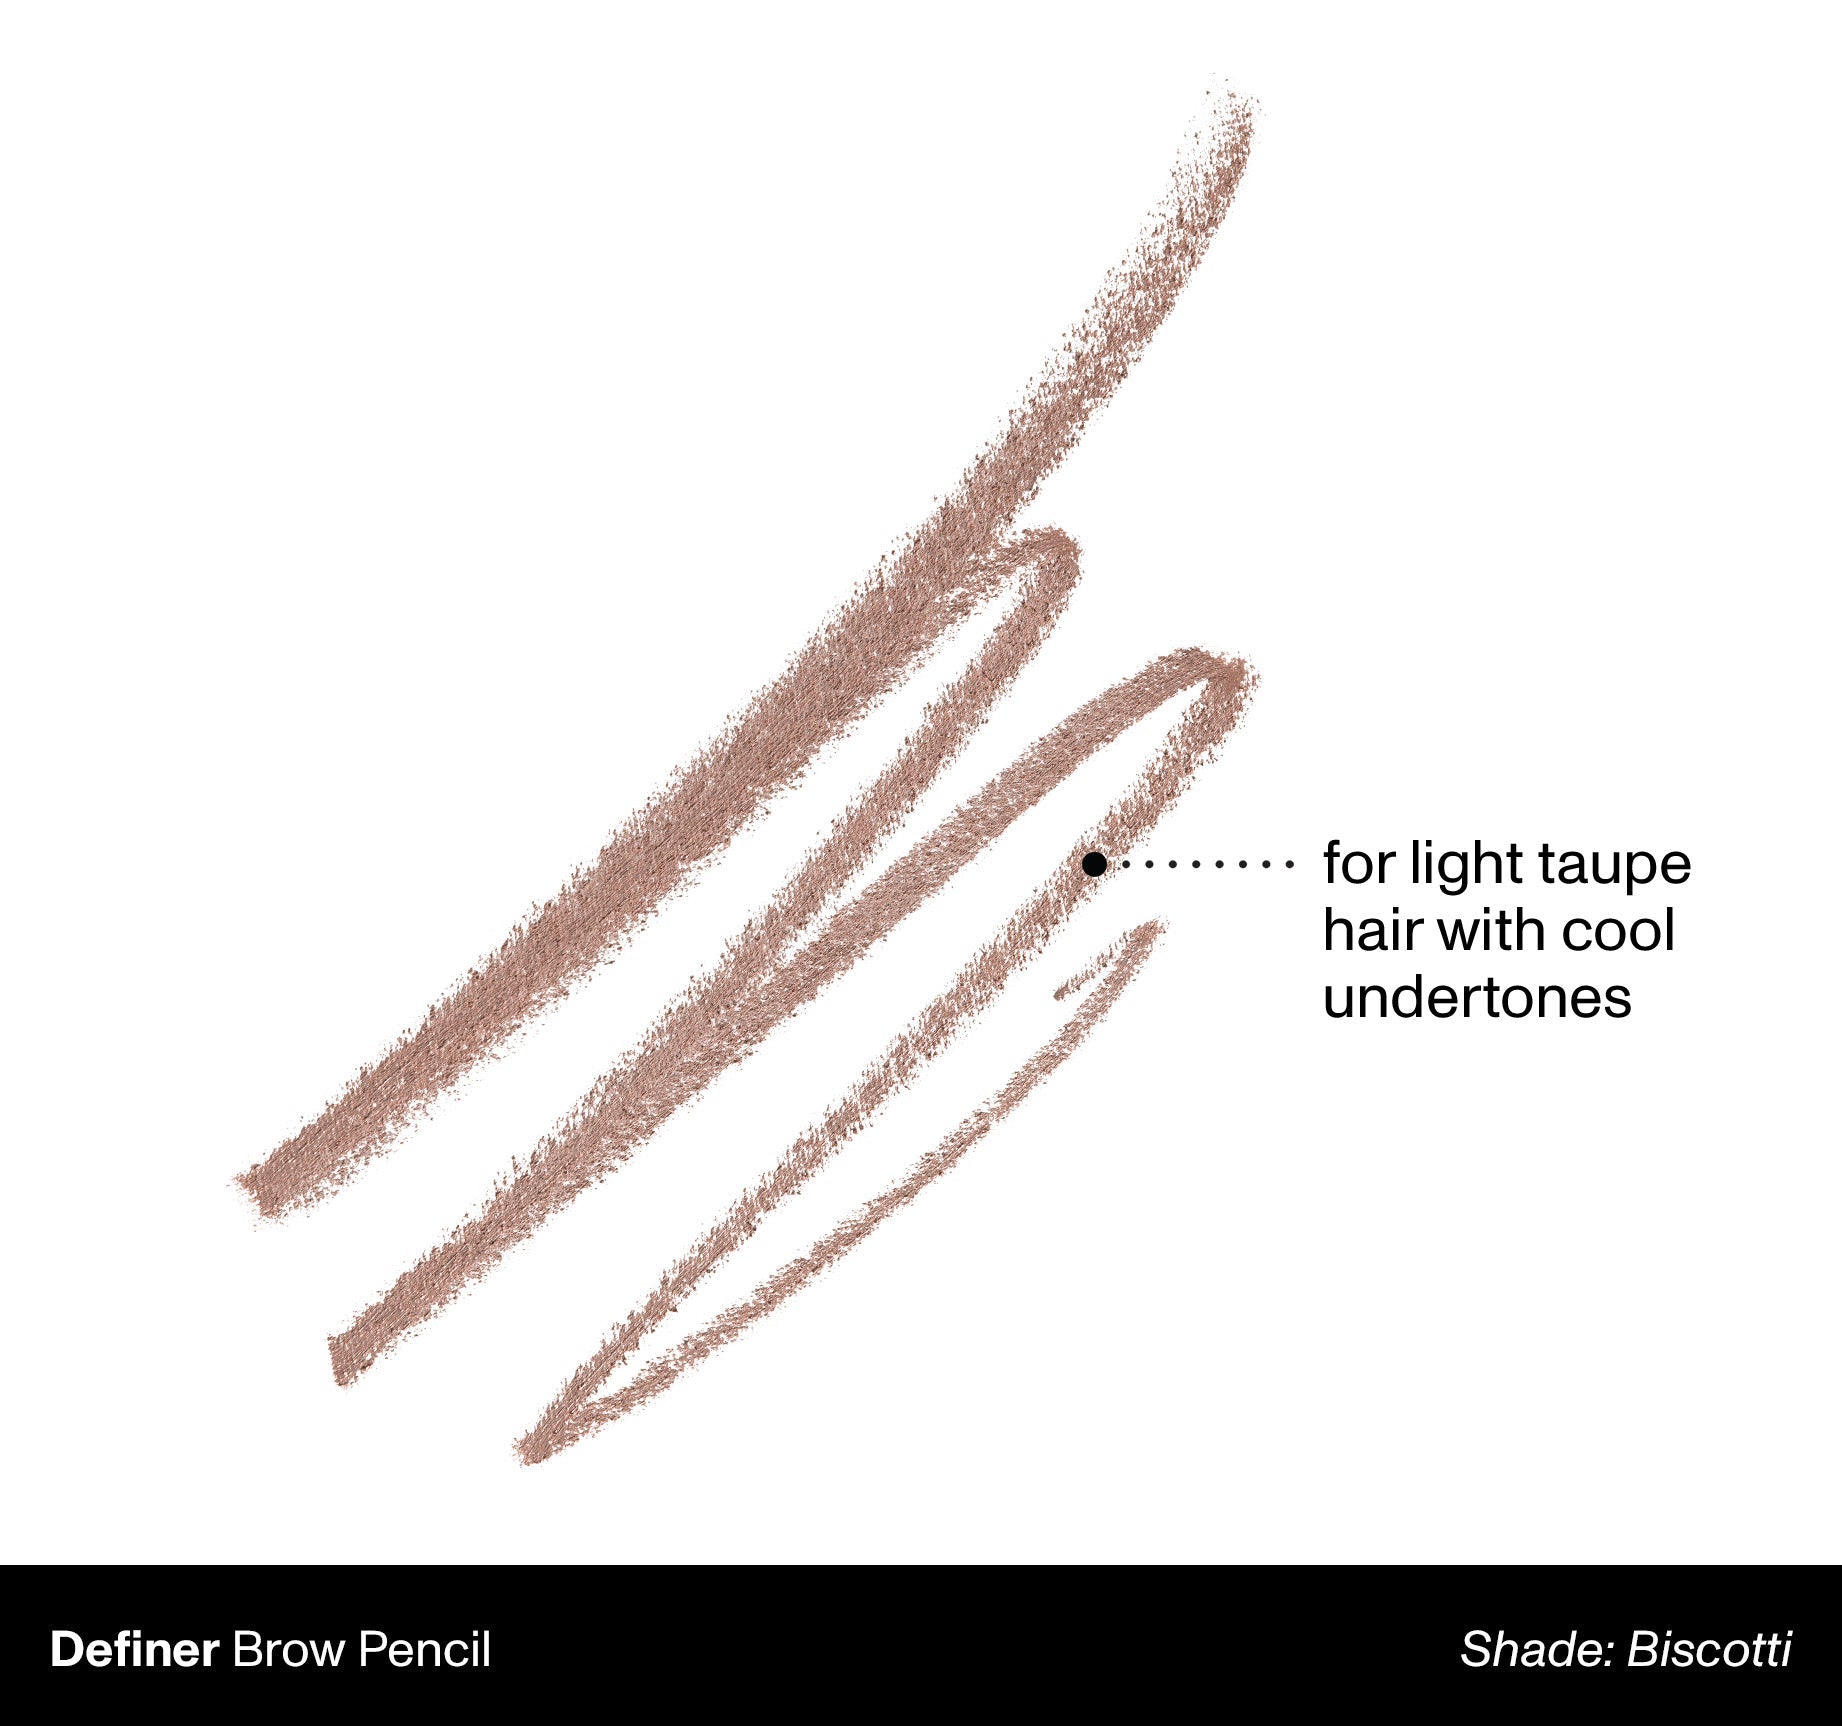 Definer Dual-Ended Brow Pencil & Spoolie - Biscotti - Image 2